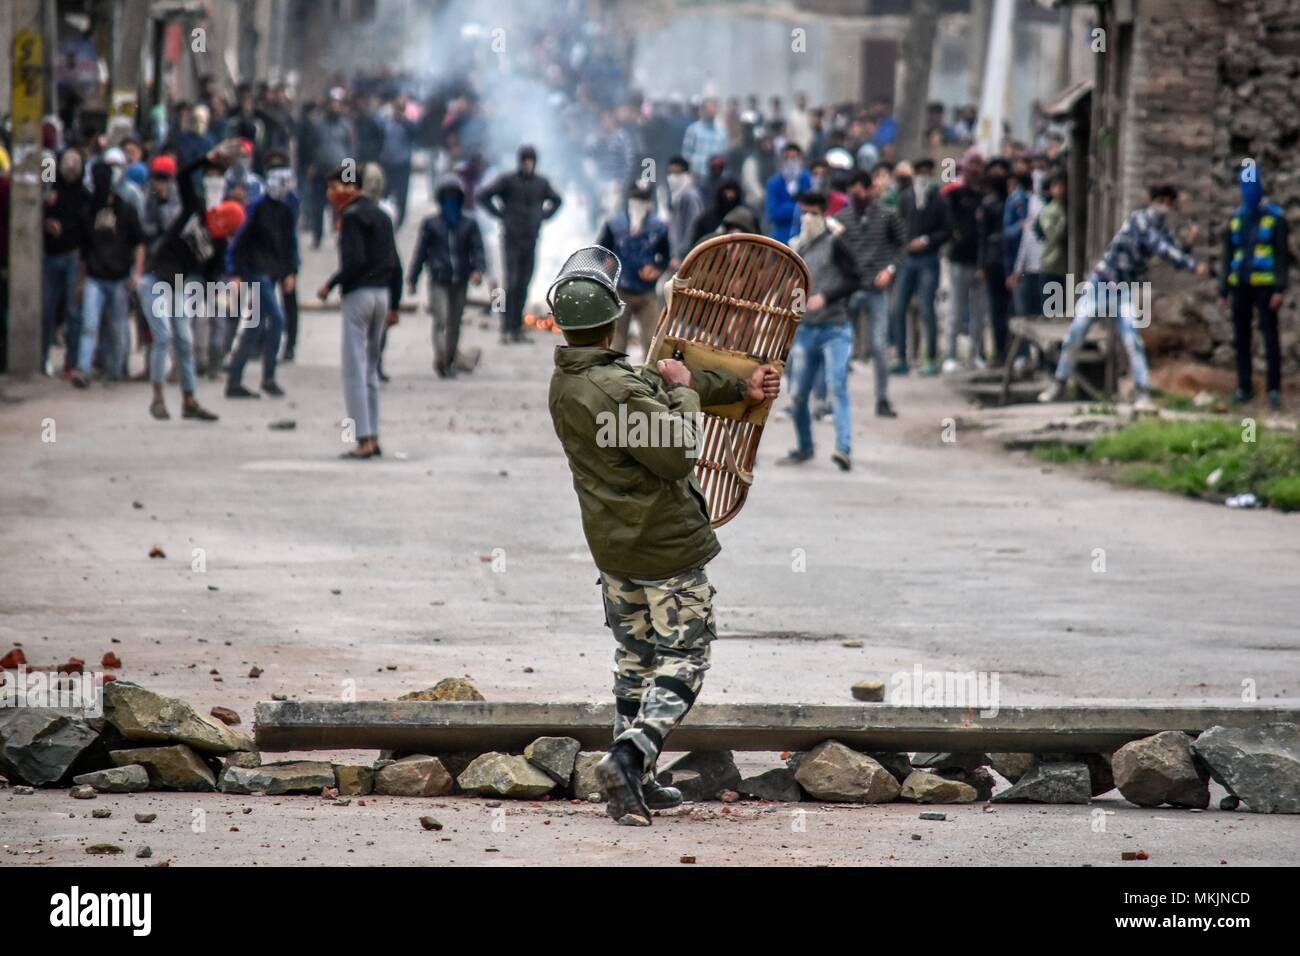 May 8, 2018 - Srinagar, J&K, India - An Indian paramilitary trooper shields himself from stones hurled by Kashmiri demonstrators during clashes in Srinagar, Indian administered Kashmir. Fierce clashes broke out between government forces and Kashmiri protesters in Srinagar on Tuesday as the valley continued to remain tense over the killing of 11 people including 5 militants and 6 civilians in Indian administered Kashmir. Police used tear smoke shells and shot gun pellets to disperse hundreds of demonstrators who hurled rocks and chanted anti-Indian and pro-freedom slogans. (Credit Image: © Saqi Stock Photo